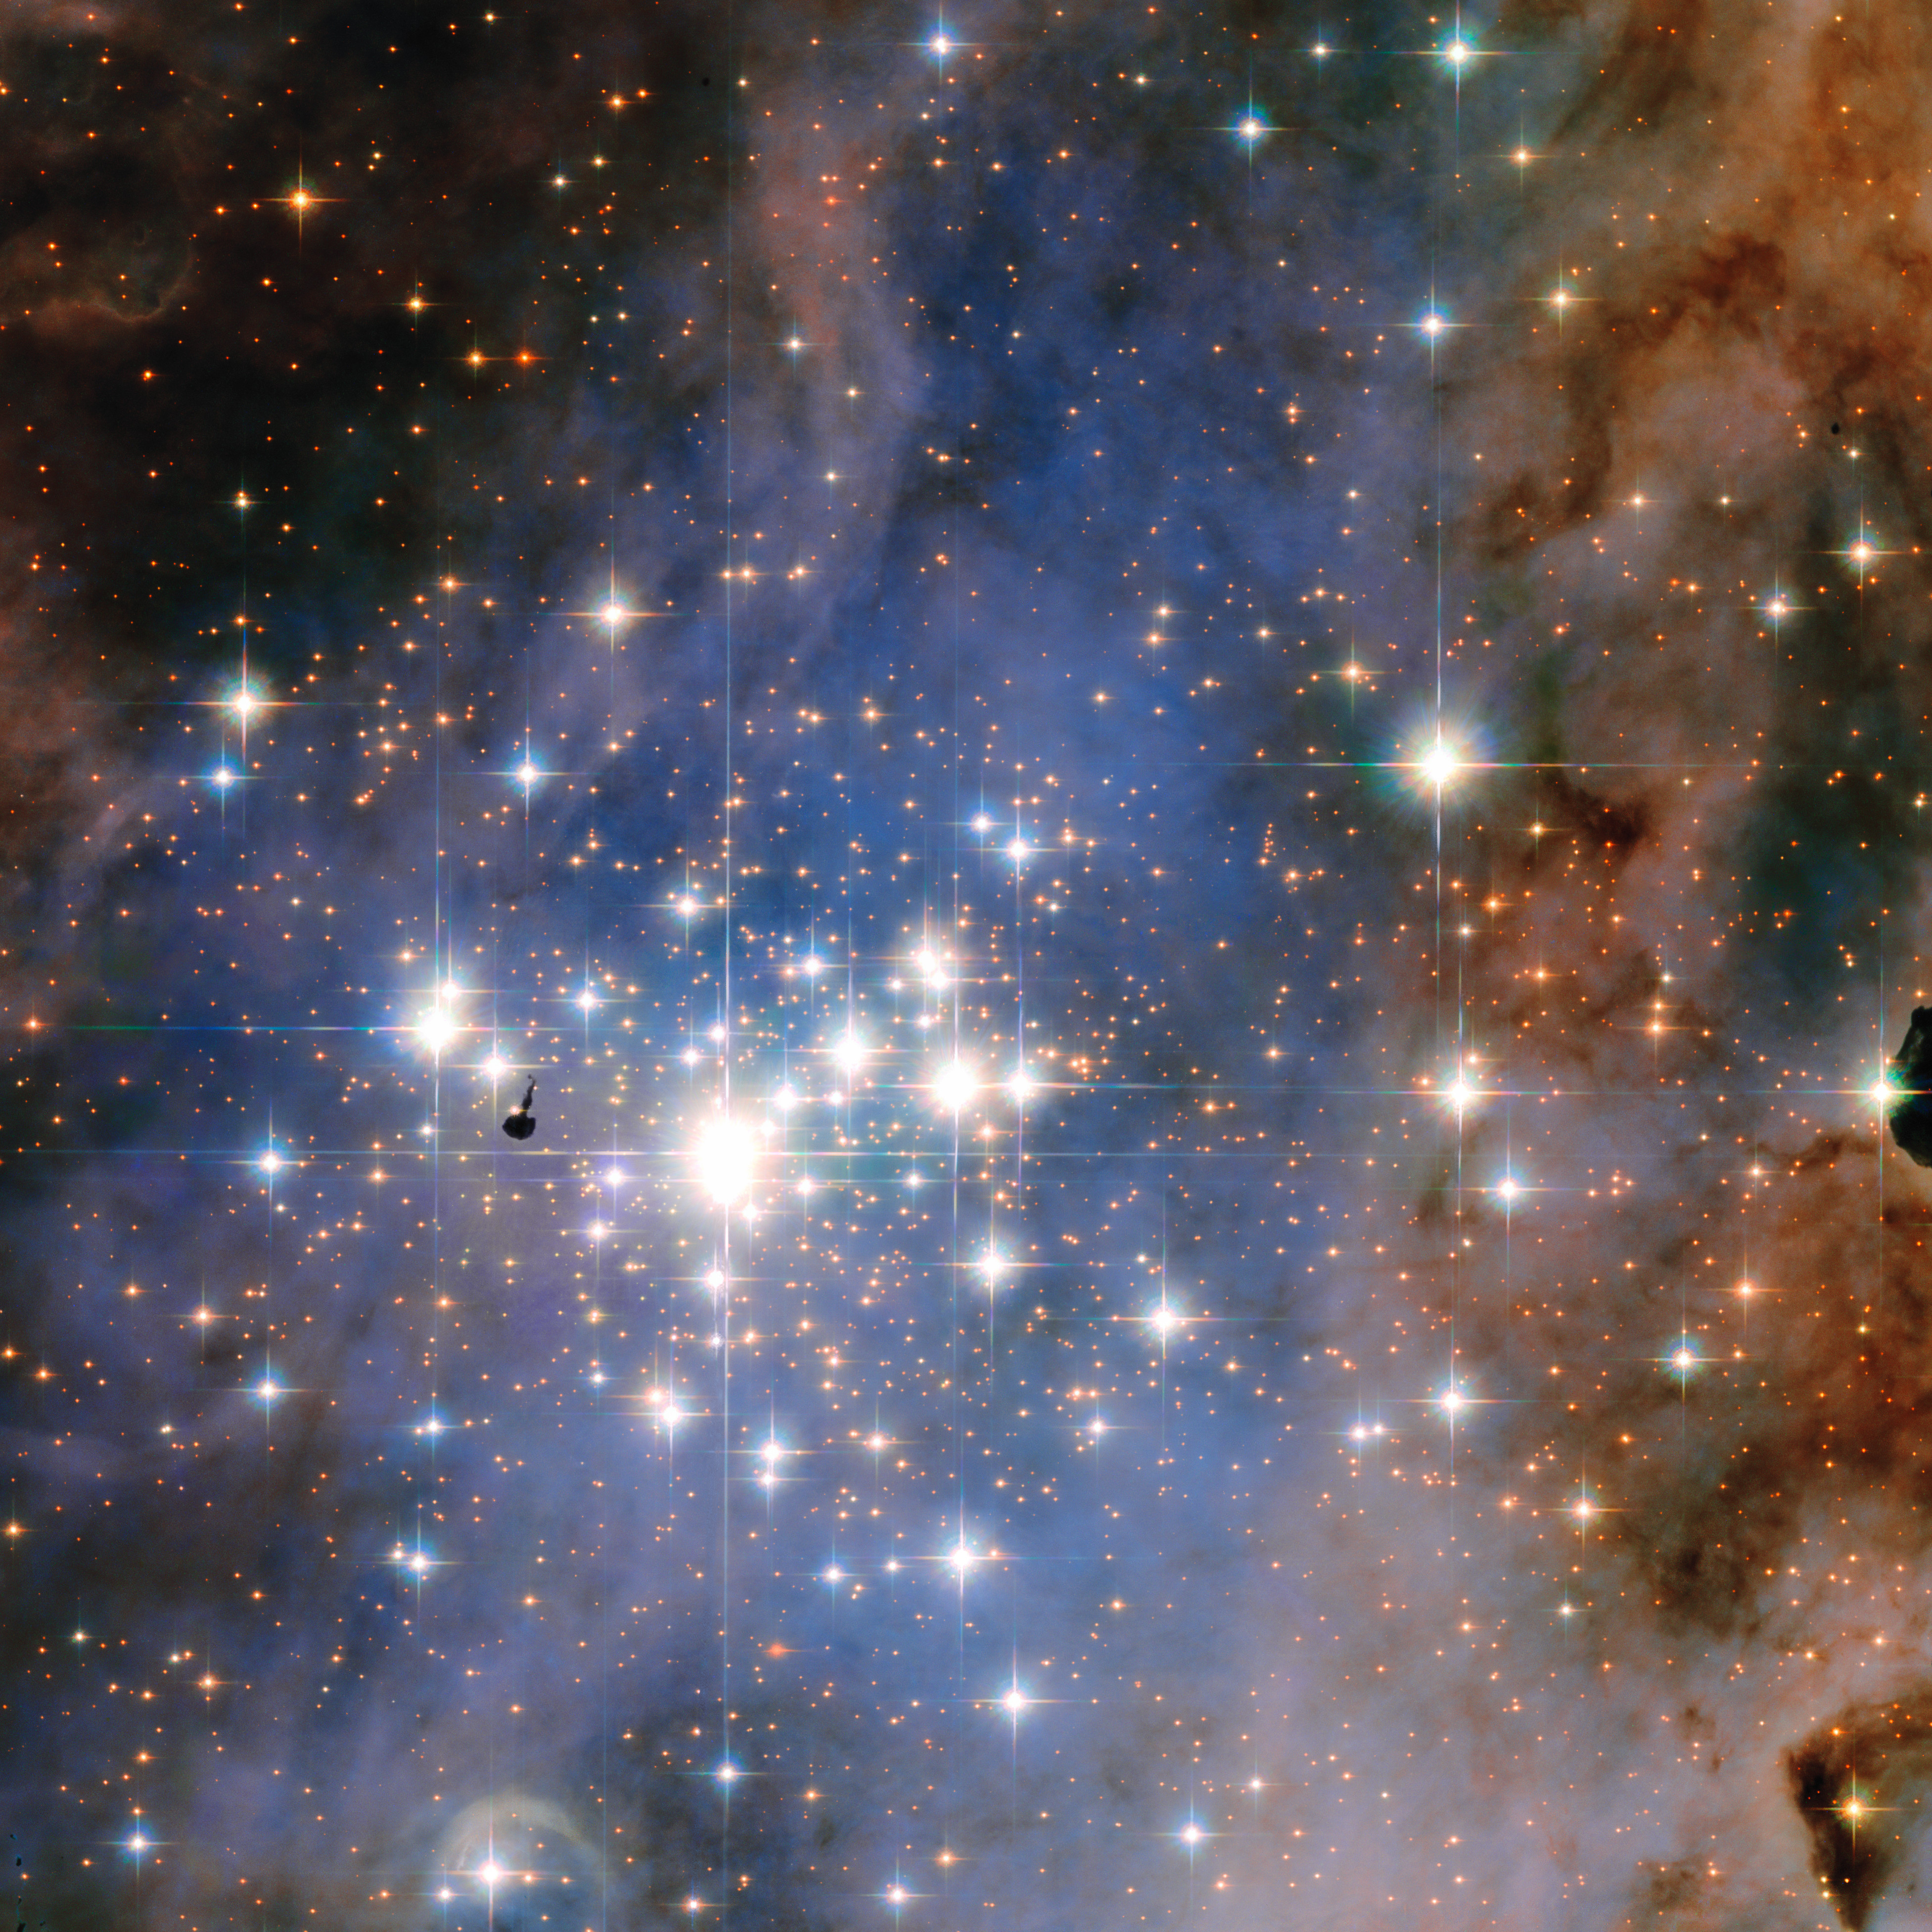 It's Full of Stars! Brilliant Cluster Captured in New Images